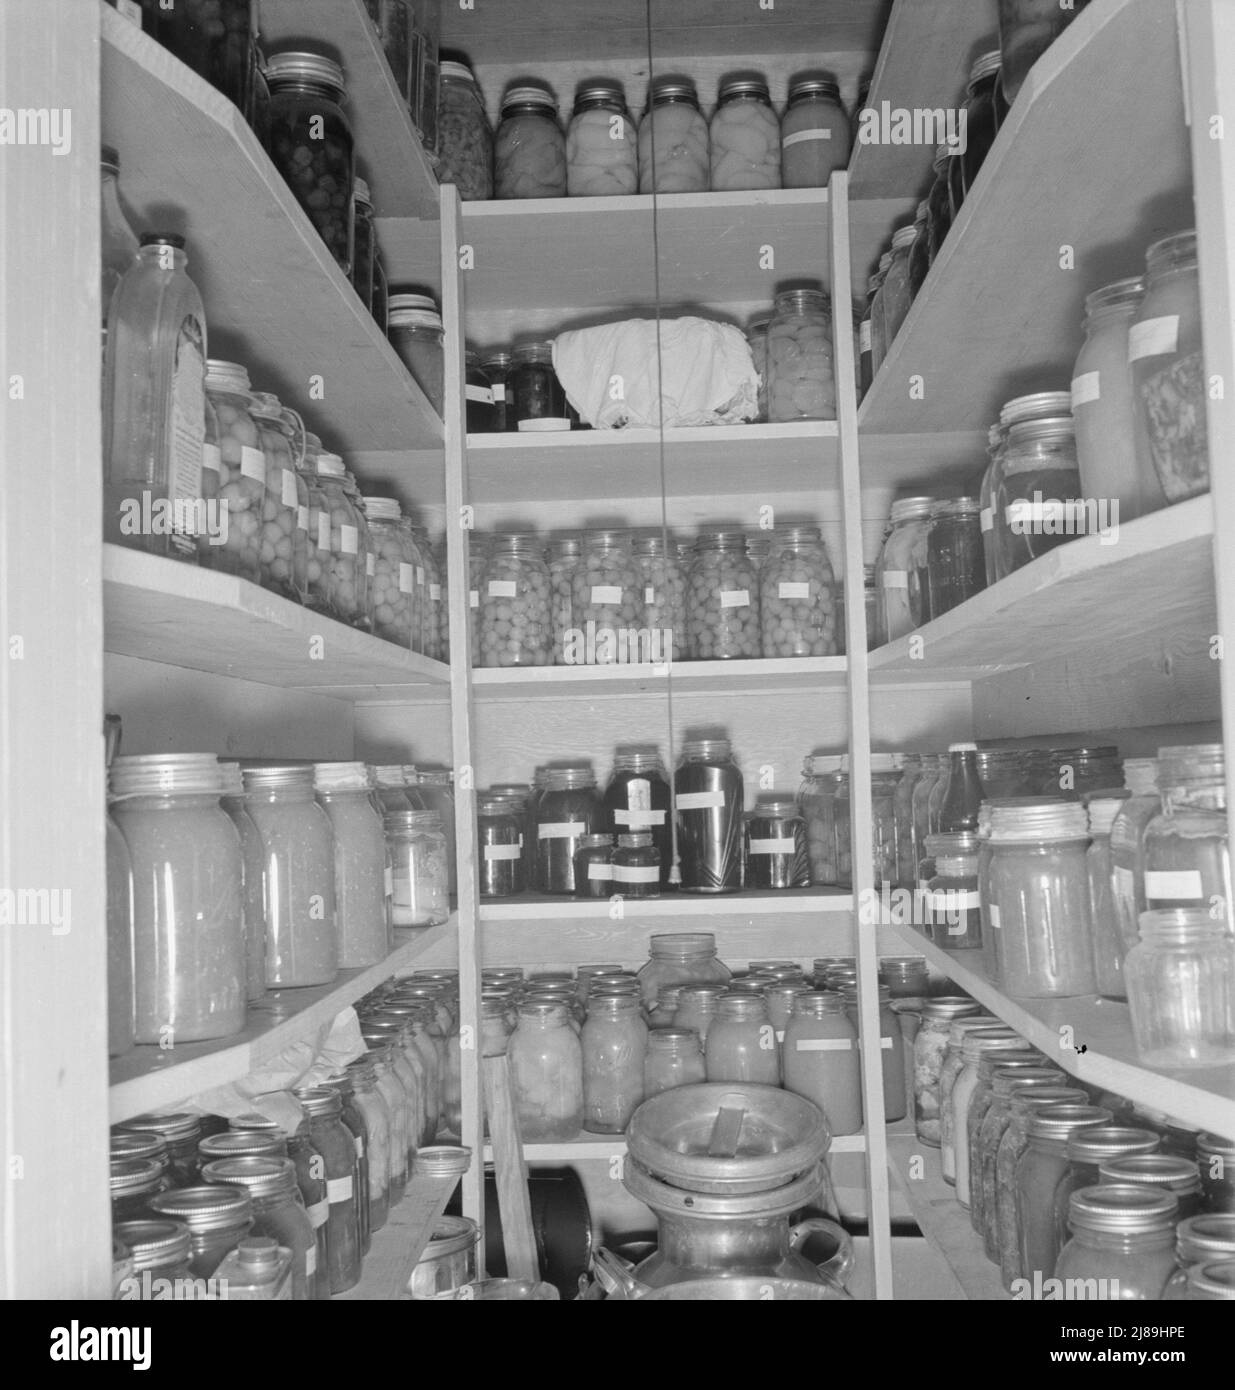 Mrs. Granger's storeroom. She has 500-600 quarts of canned food. &quot;You never know what may happen.&quot; Yamhill farms. (FSA - Farm Security Administration). Yamhill County, Williamette Valley, Oregon. Stock Photo